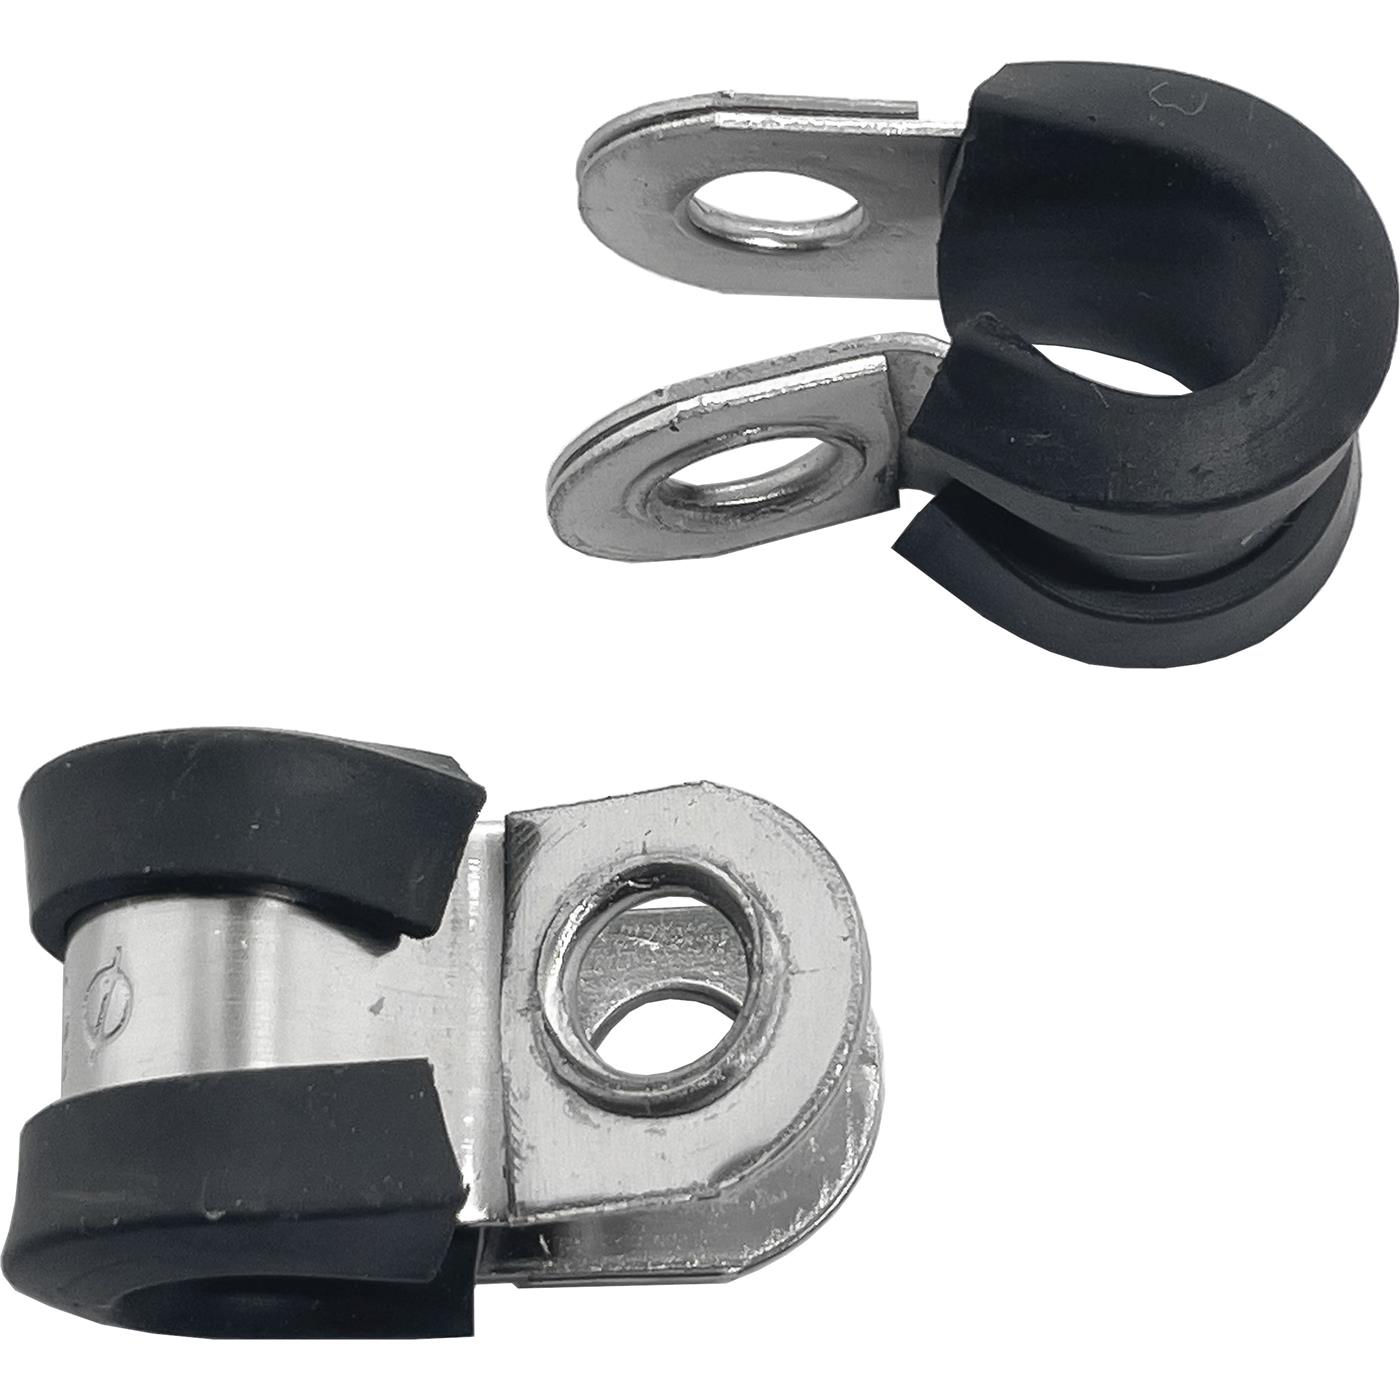 10x P-Clip Cable clamp Stainless steel V2A with Rubber 6mm Pipe clamp Mounting clip